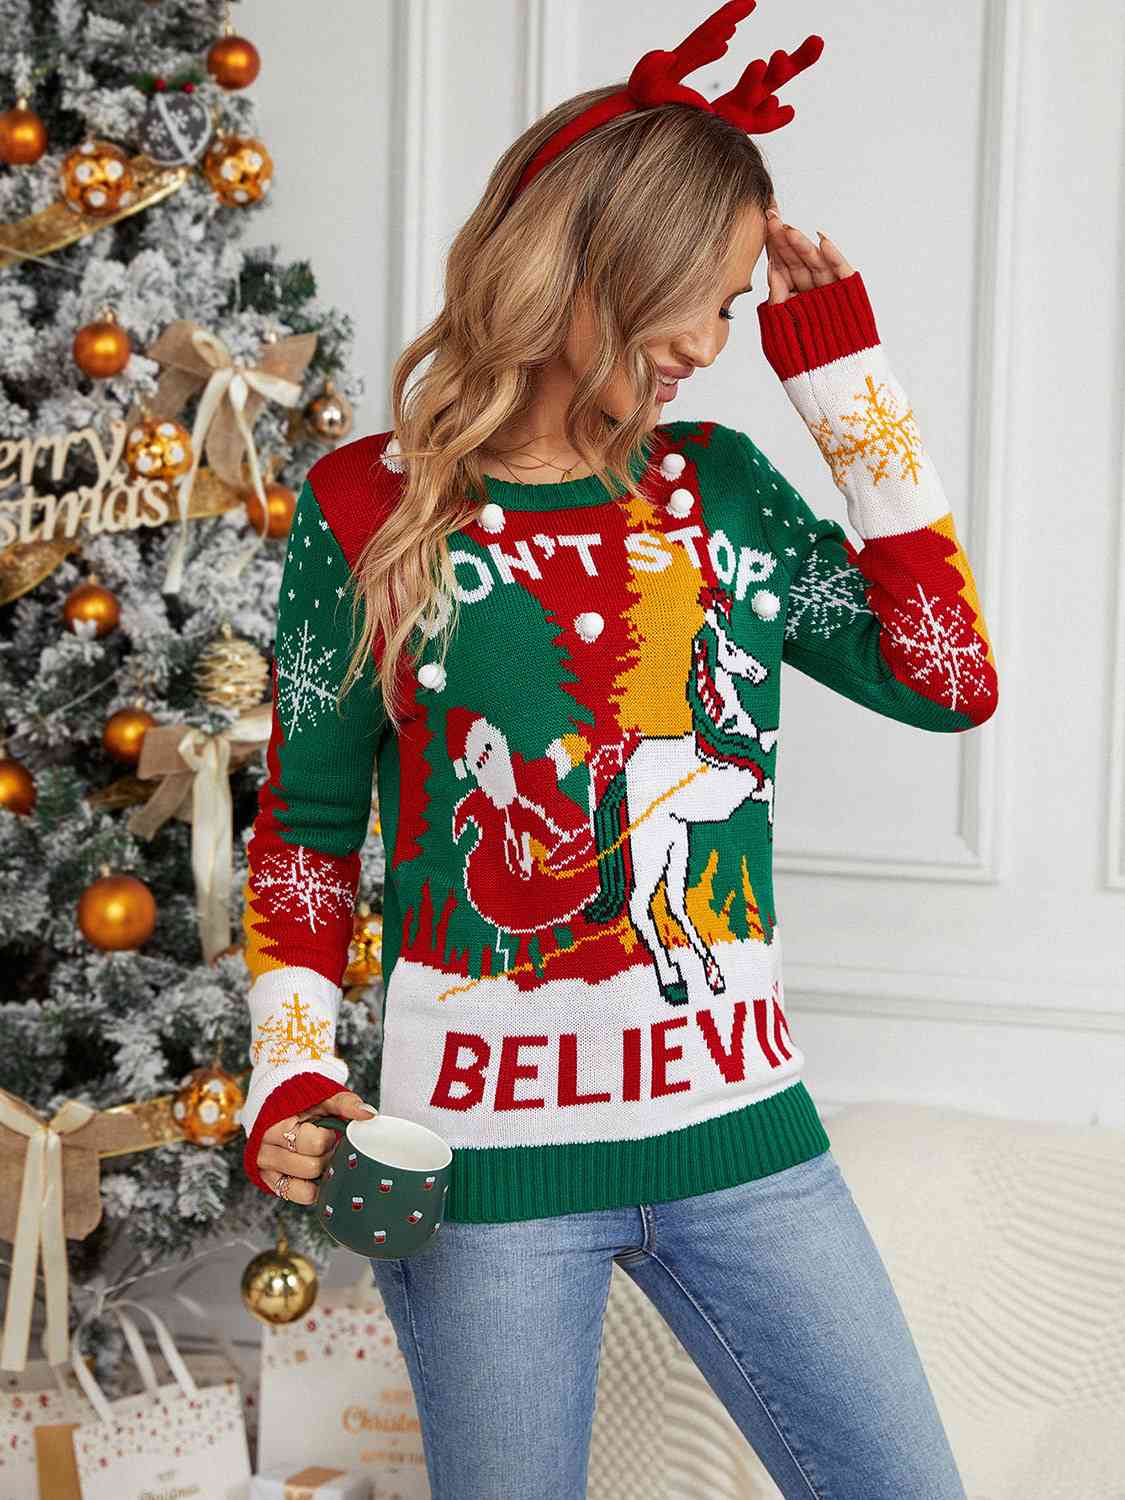 Don't Stop Believin' Santa Claus Knit Round Neck Bold PomPom Holiday Sweater Top